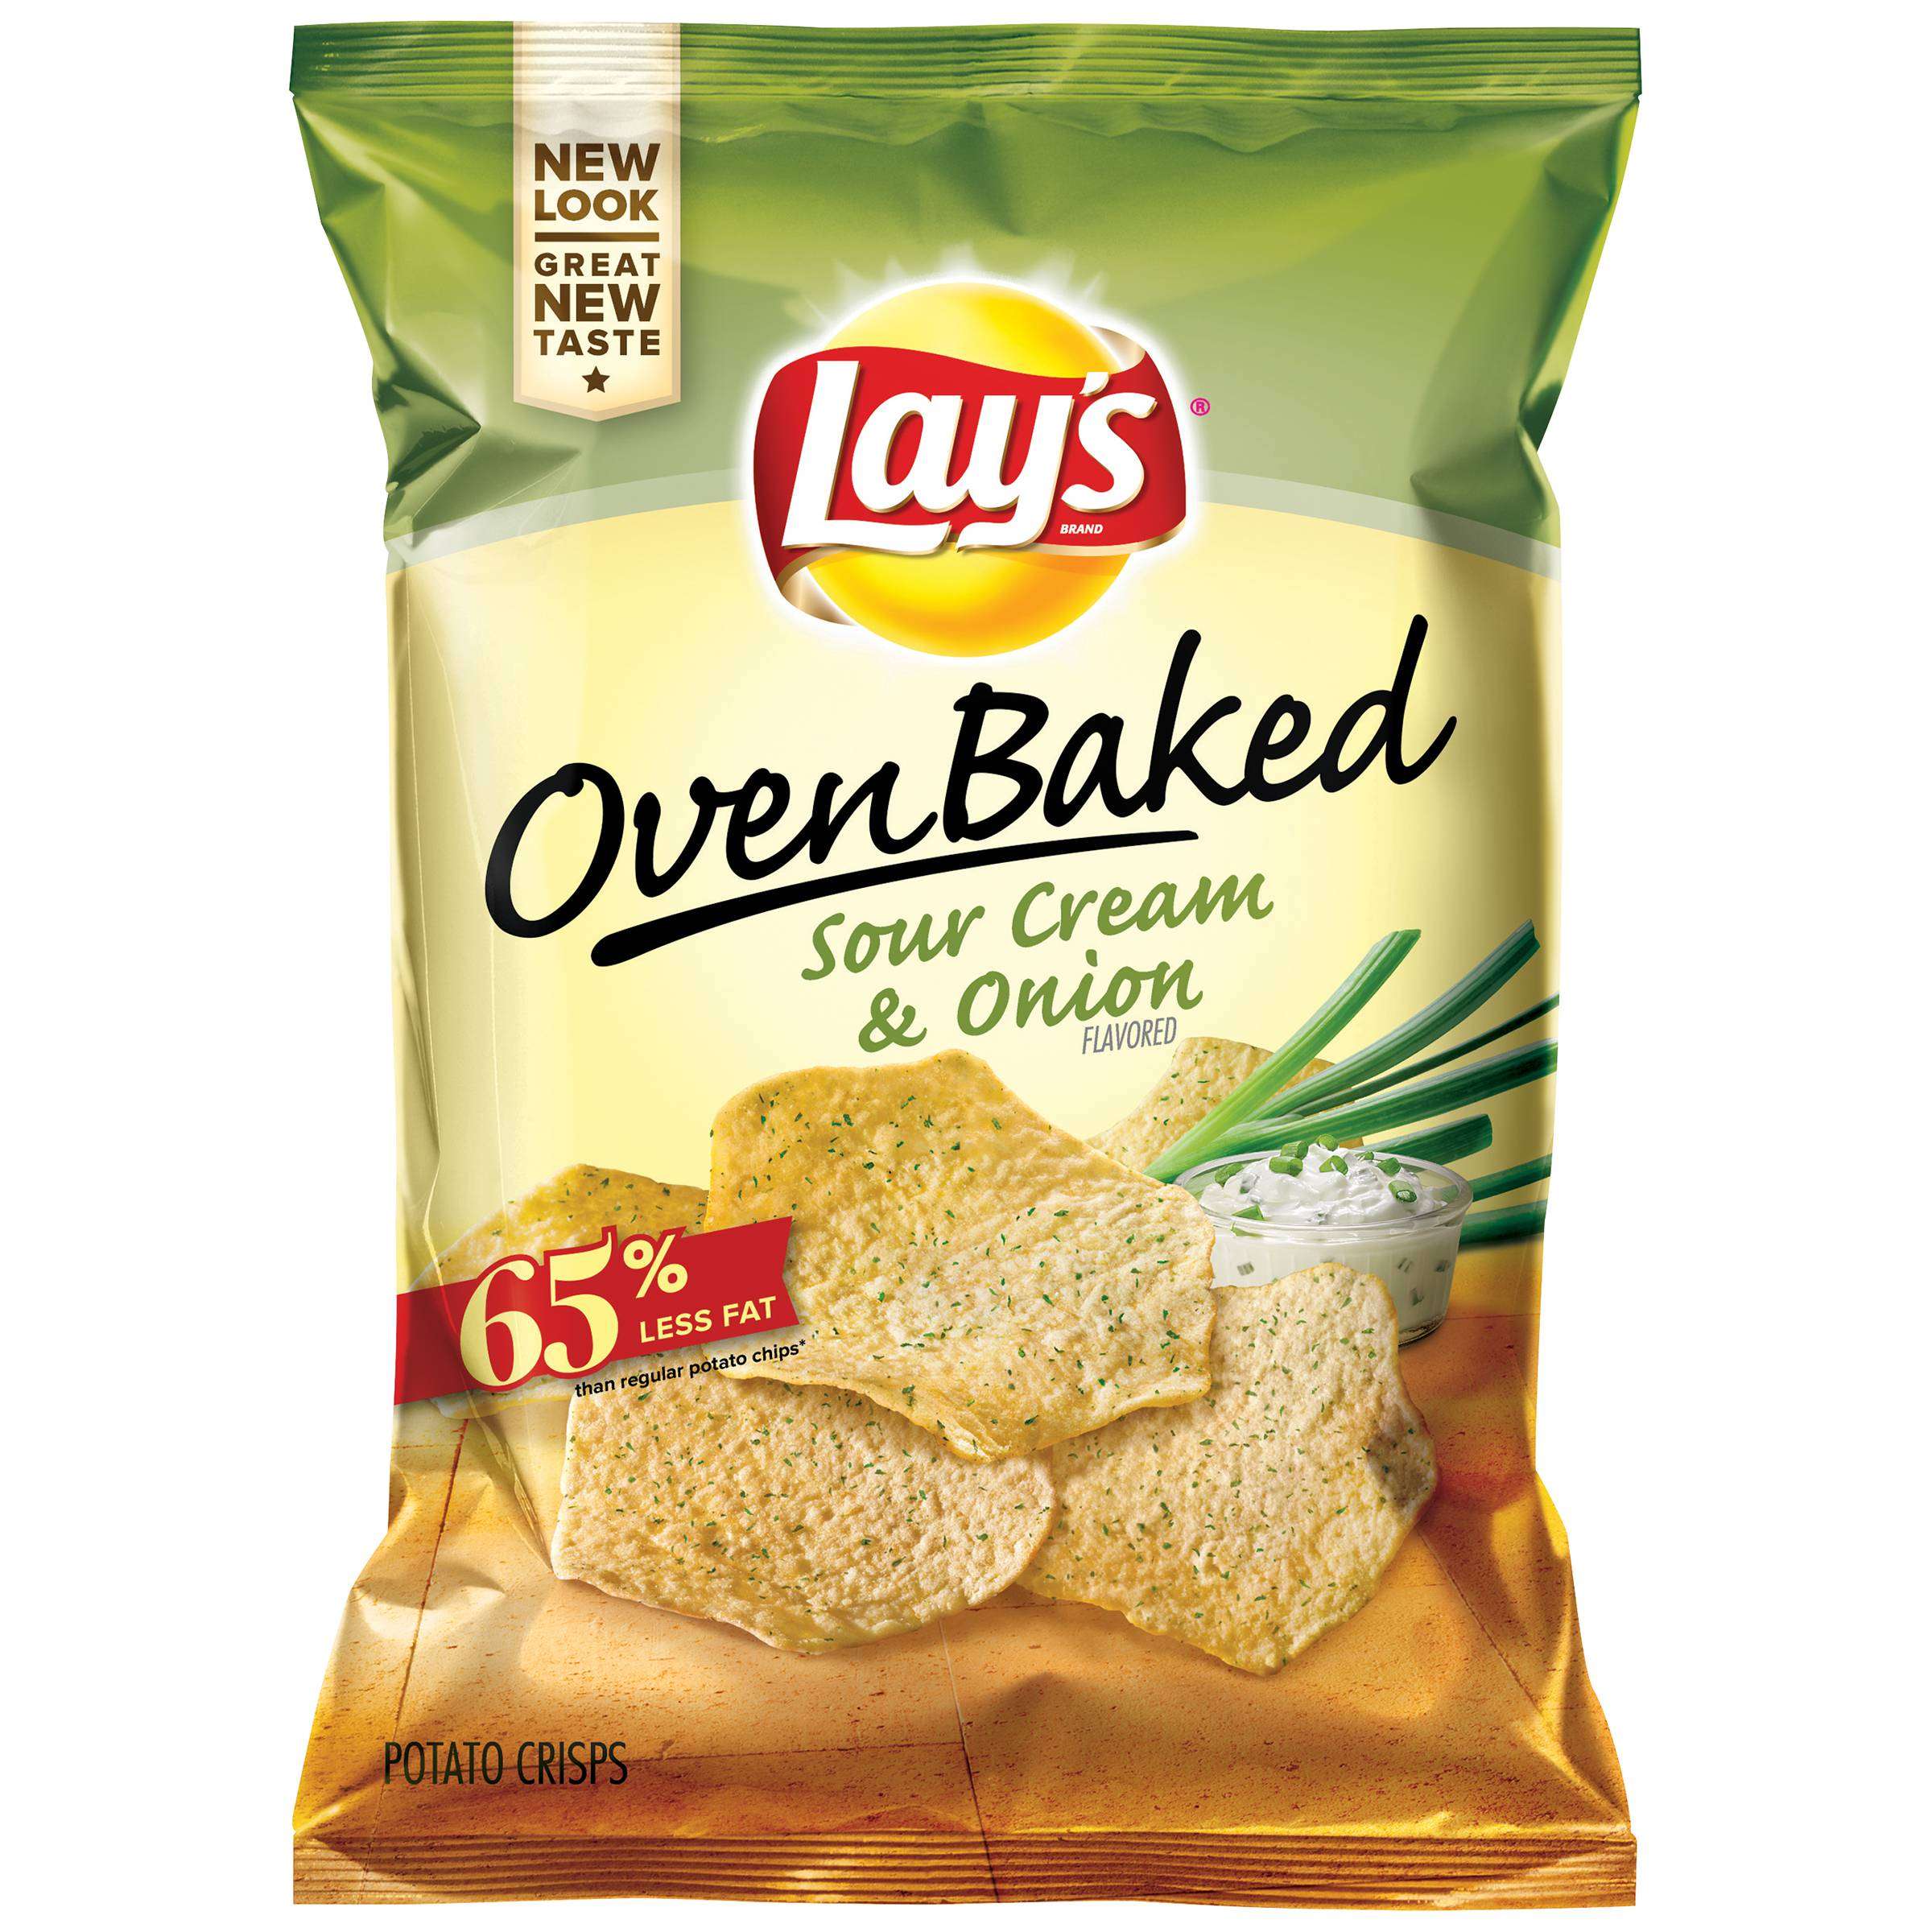 Oven Baked Barbecue Flavored Potato Crisps, 1.125 Ounce ...